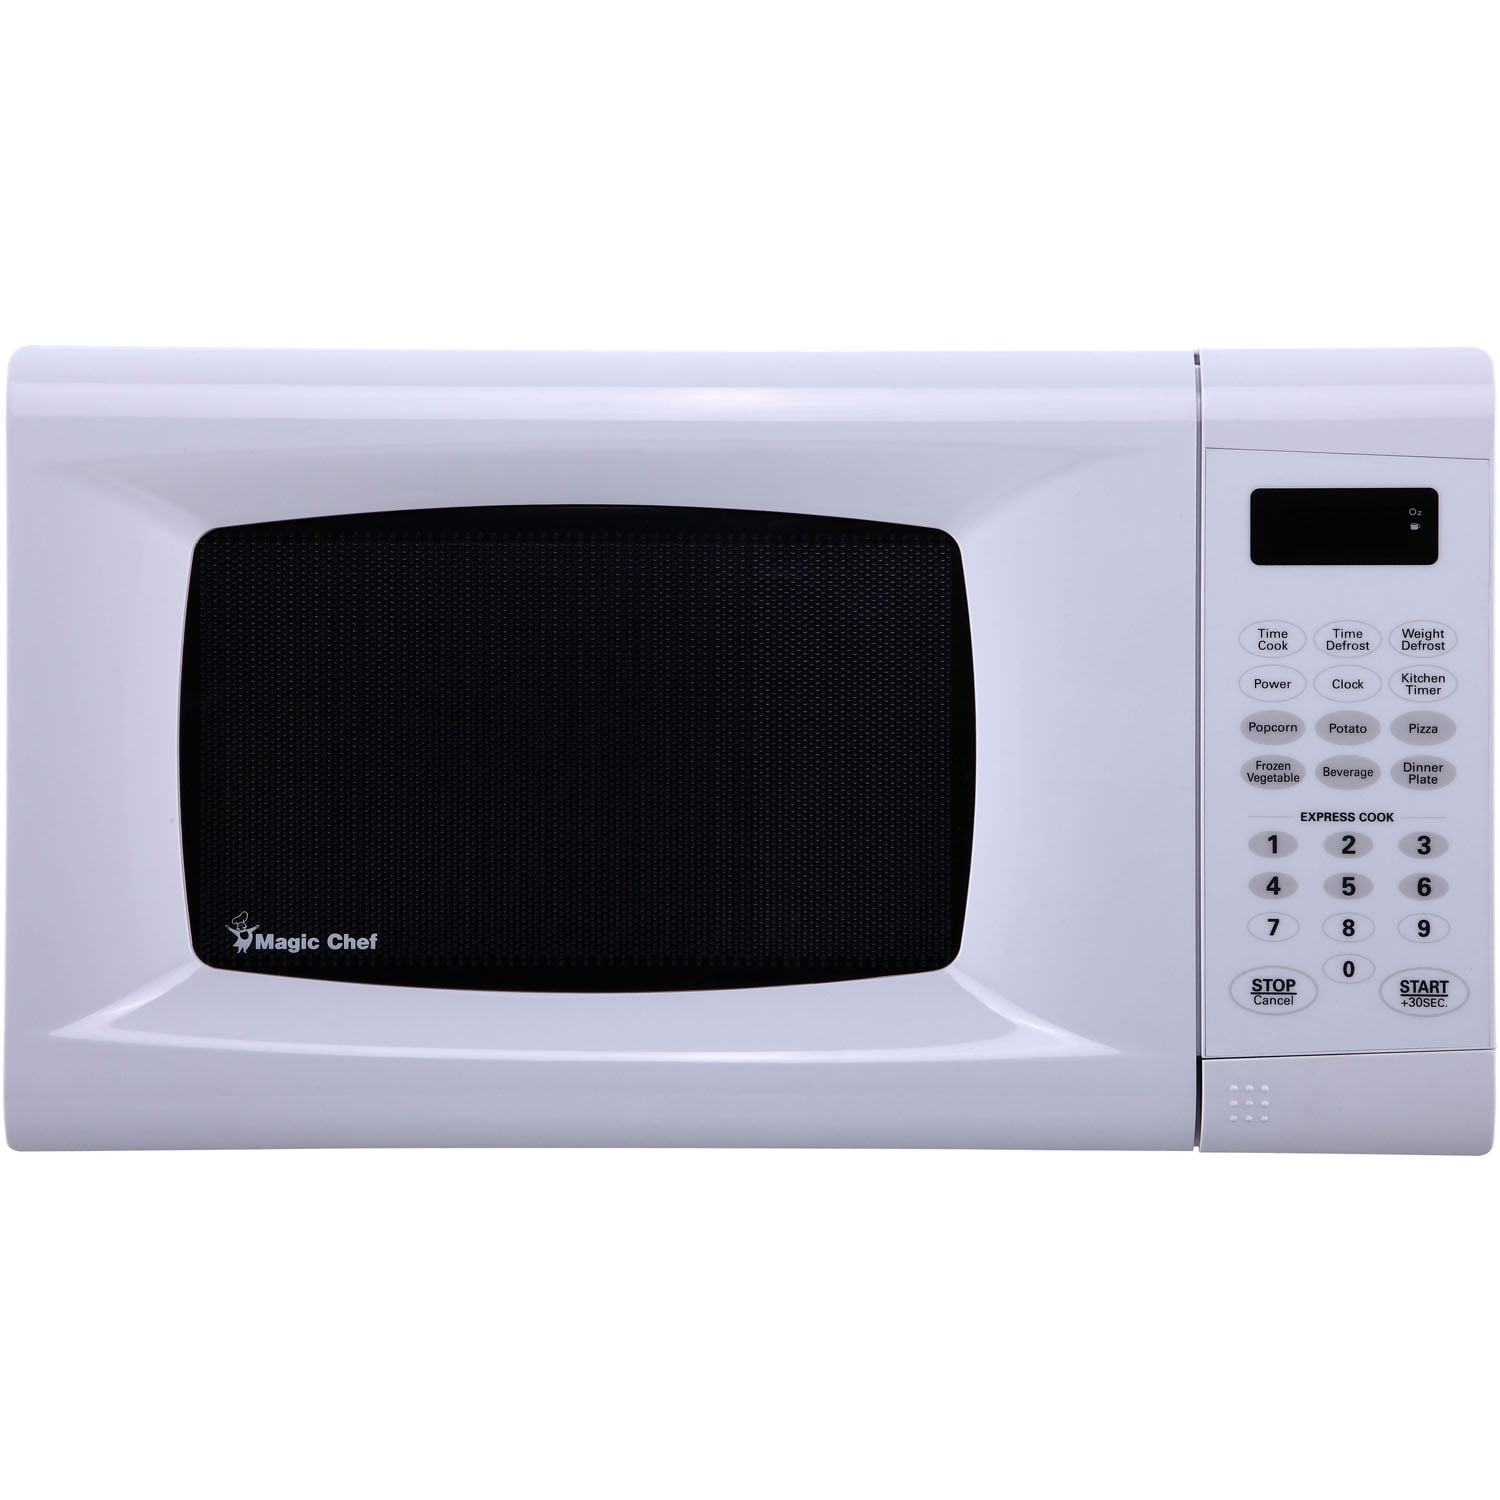 900-watt Microwave with Digital Touch Magic Chef 0.9 cu ft Stainless Steel 